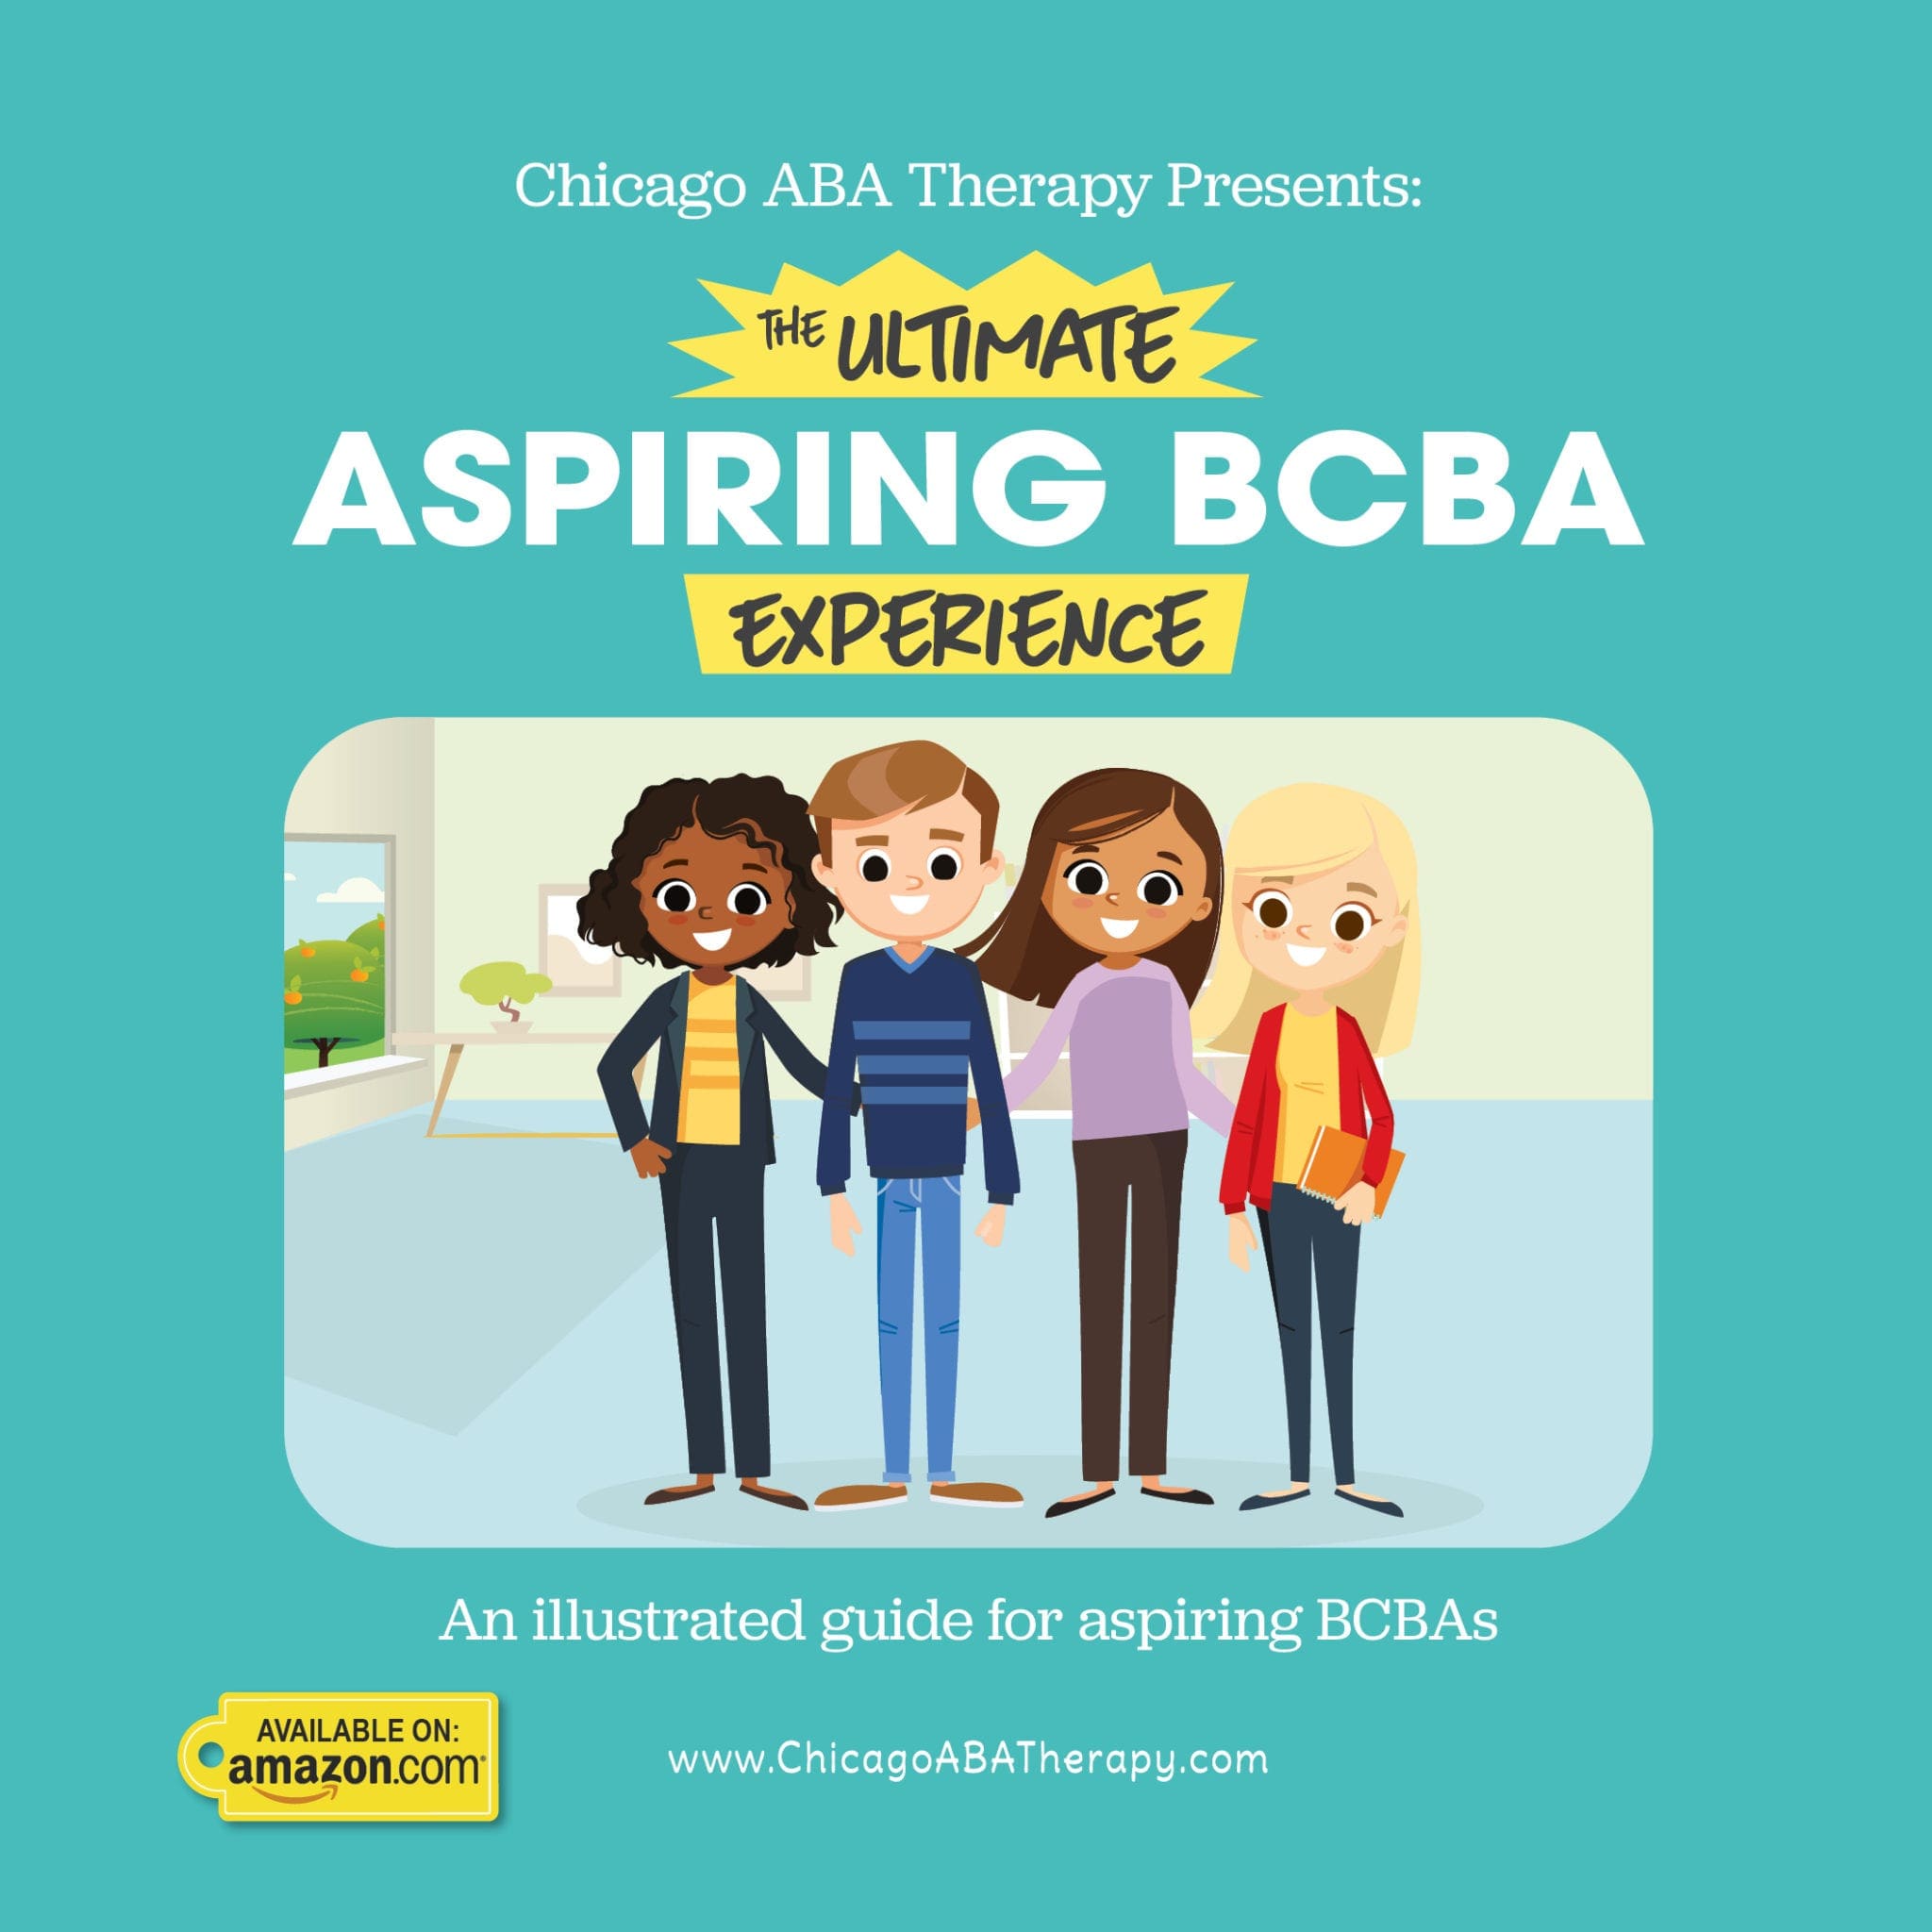 The Ultimate Aspiring BCBA Experience - Chicago ABA Therapy